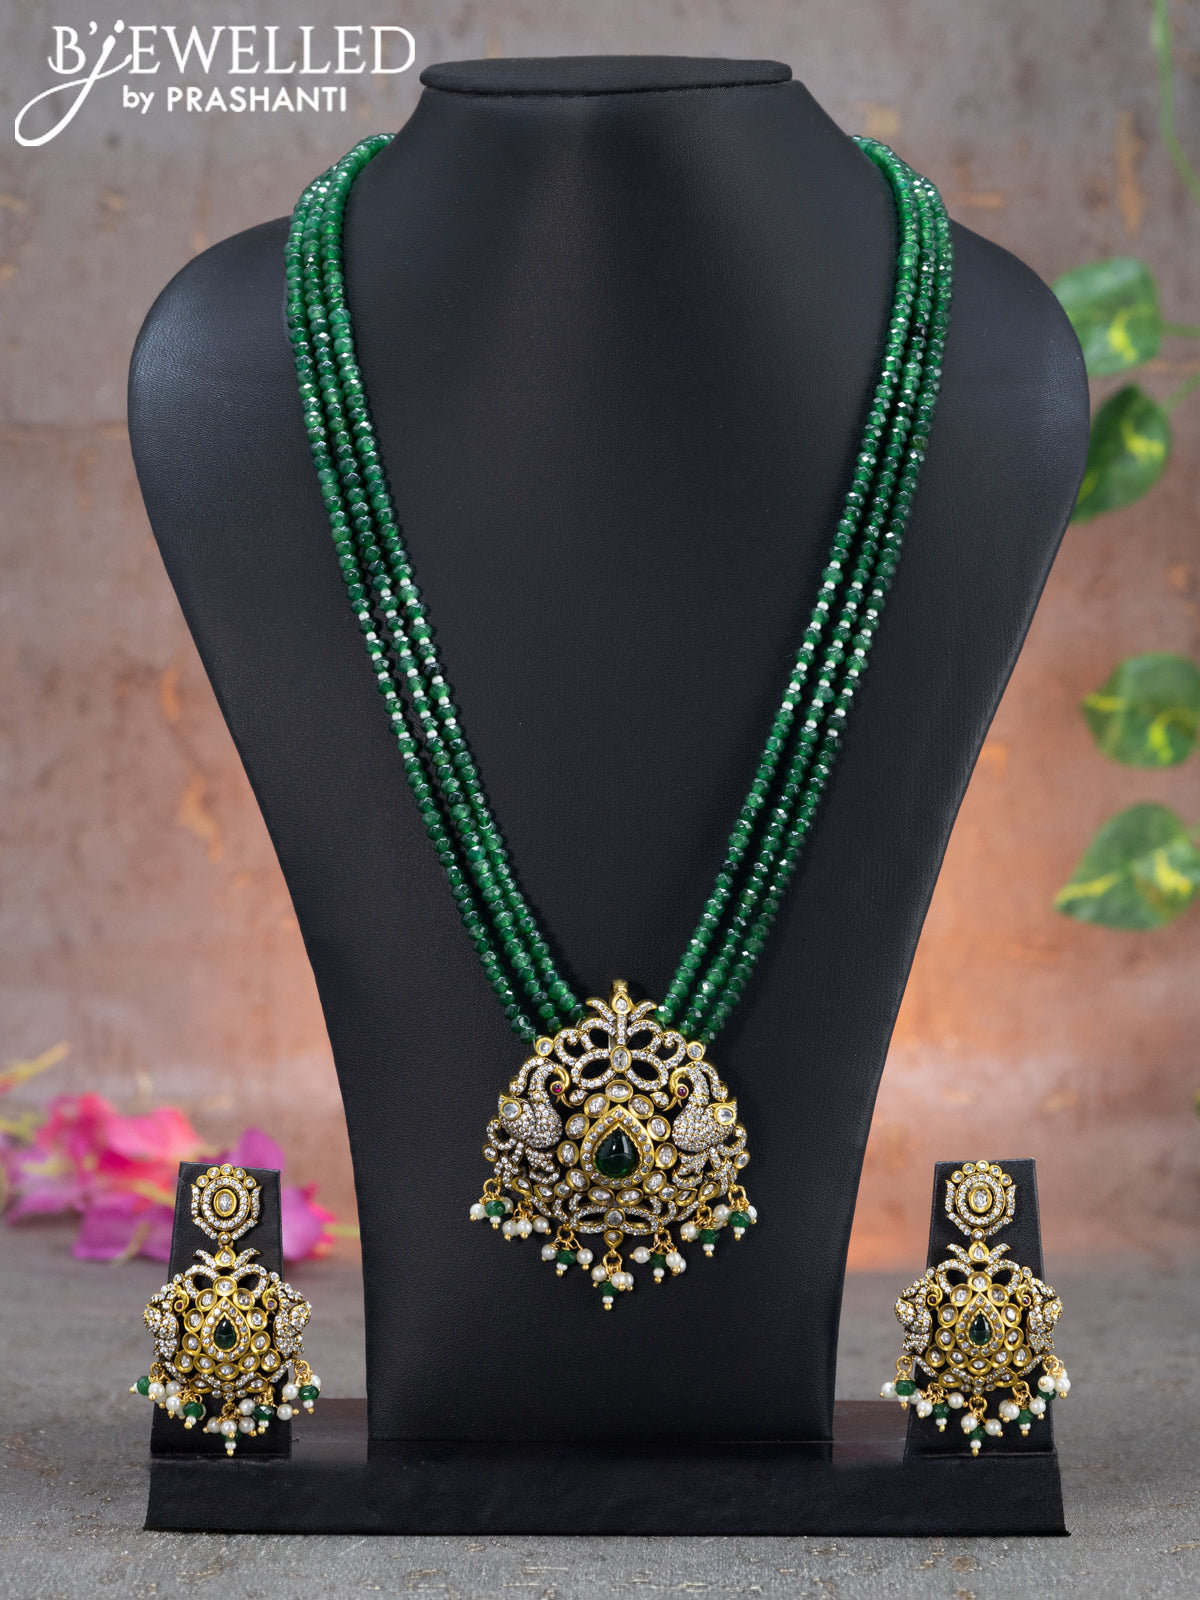 Beaded triple layer green necklace swan design with emerald & cz stone ...